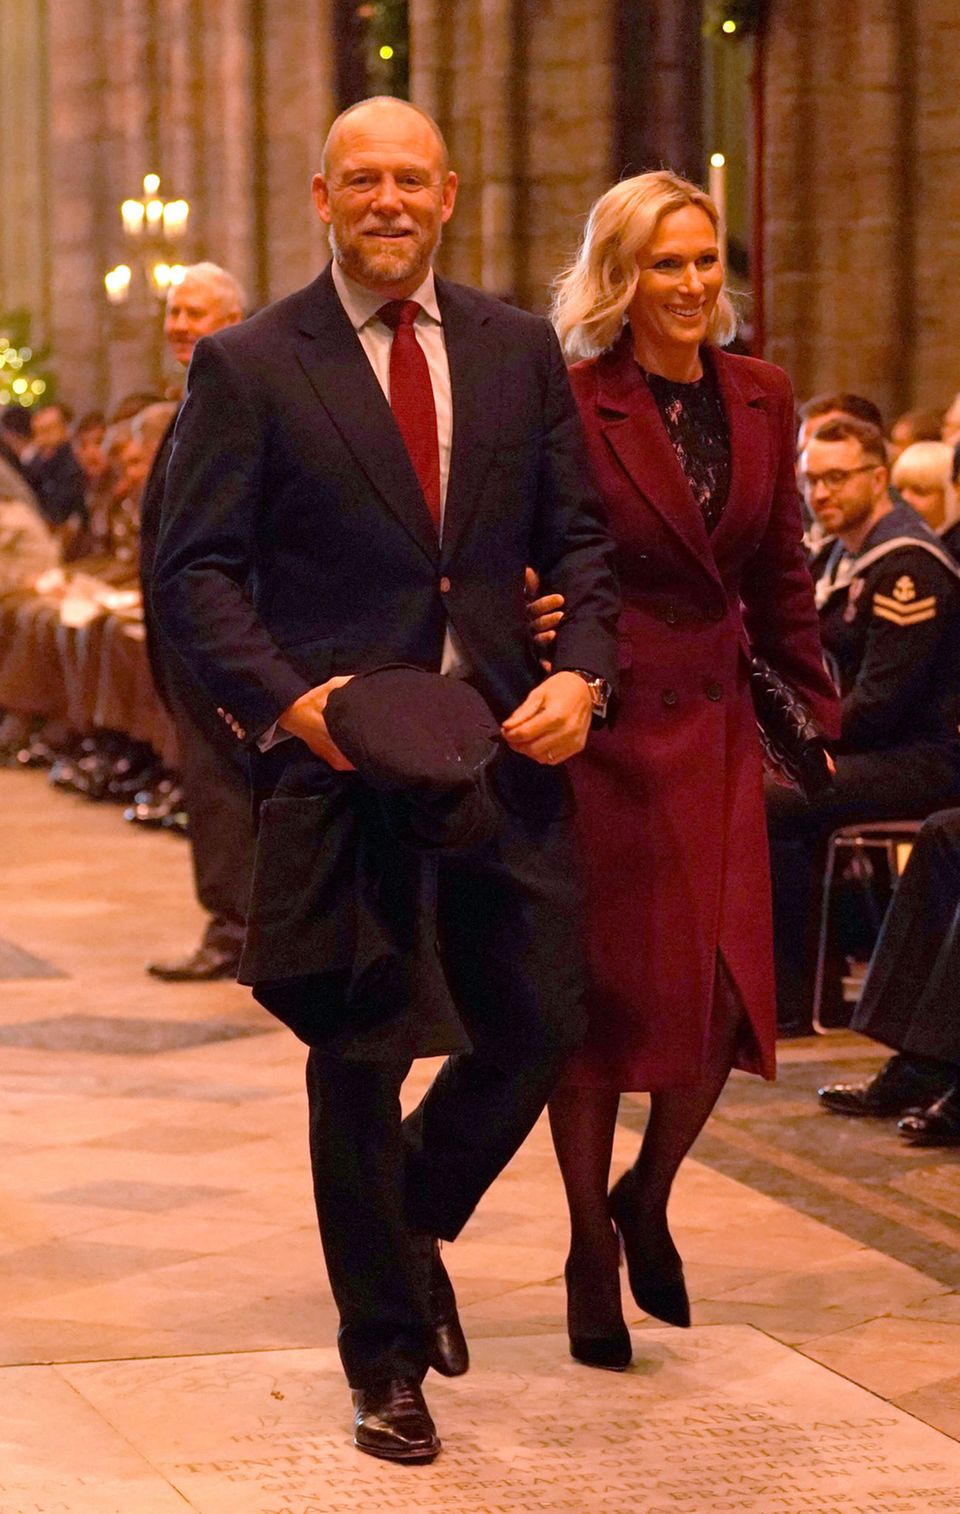 Mike and Zara Tindall "together at Christmas" Christmas party at Westminster Abbey.